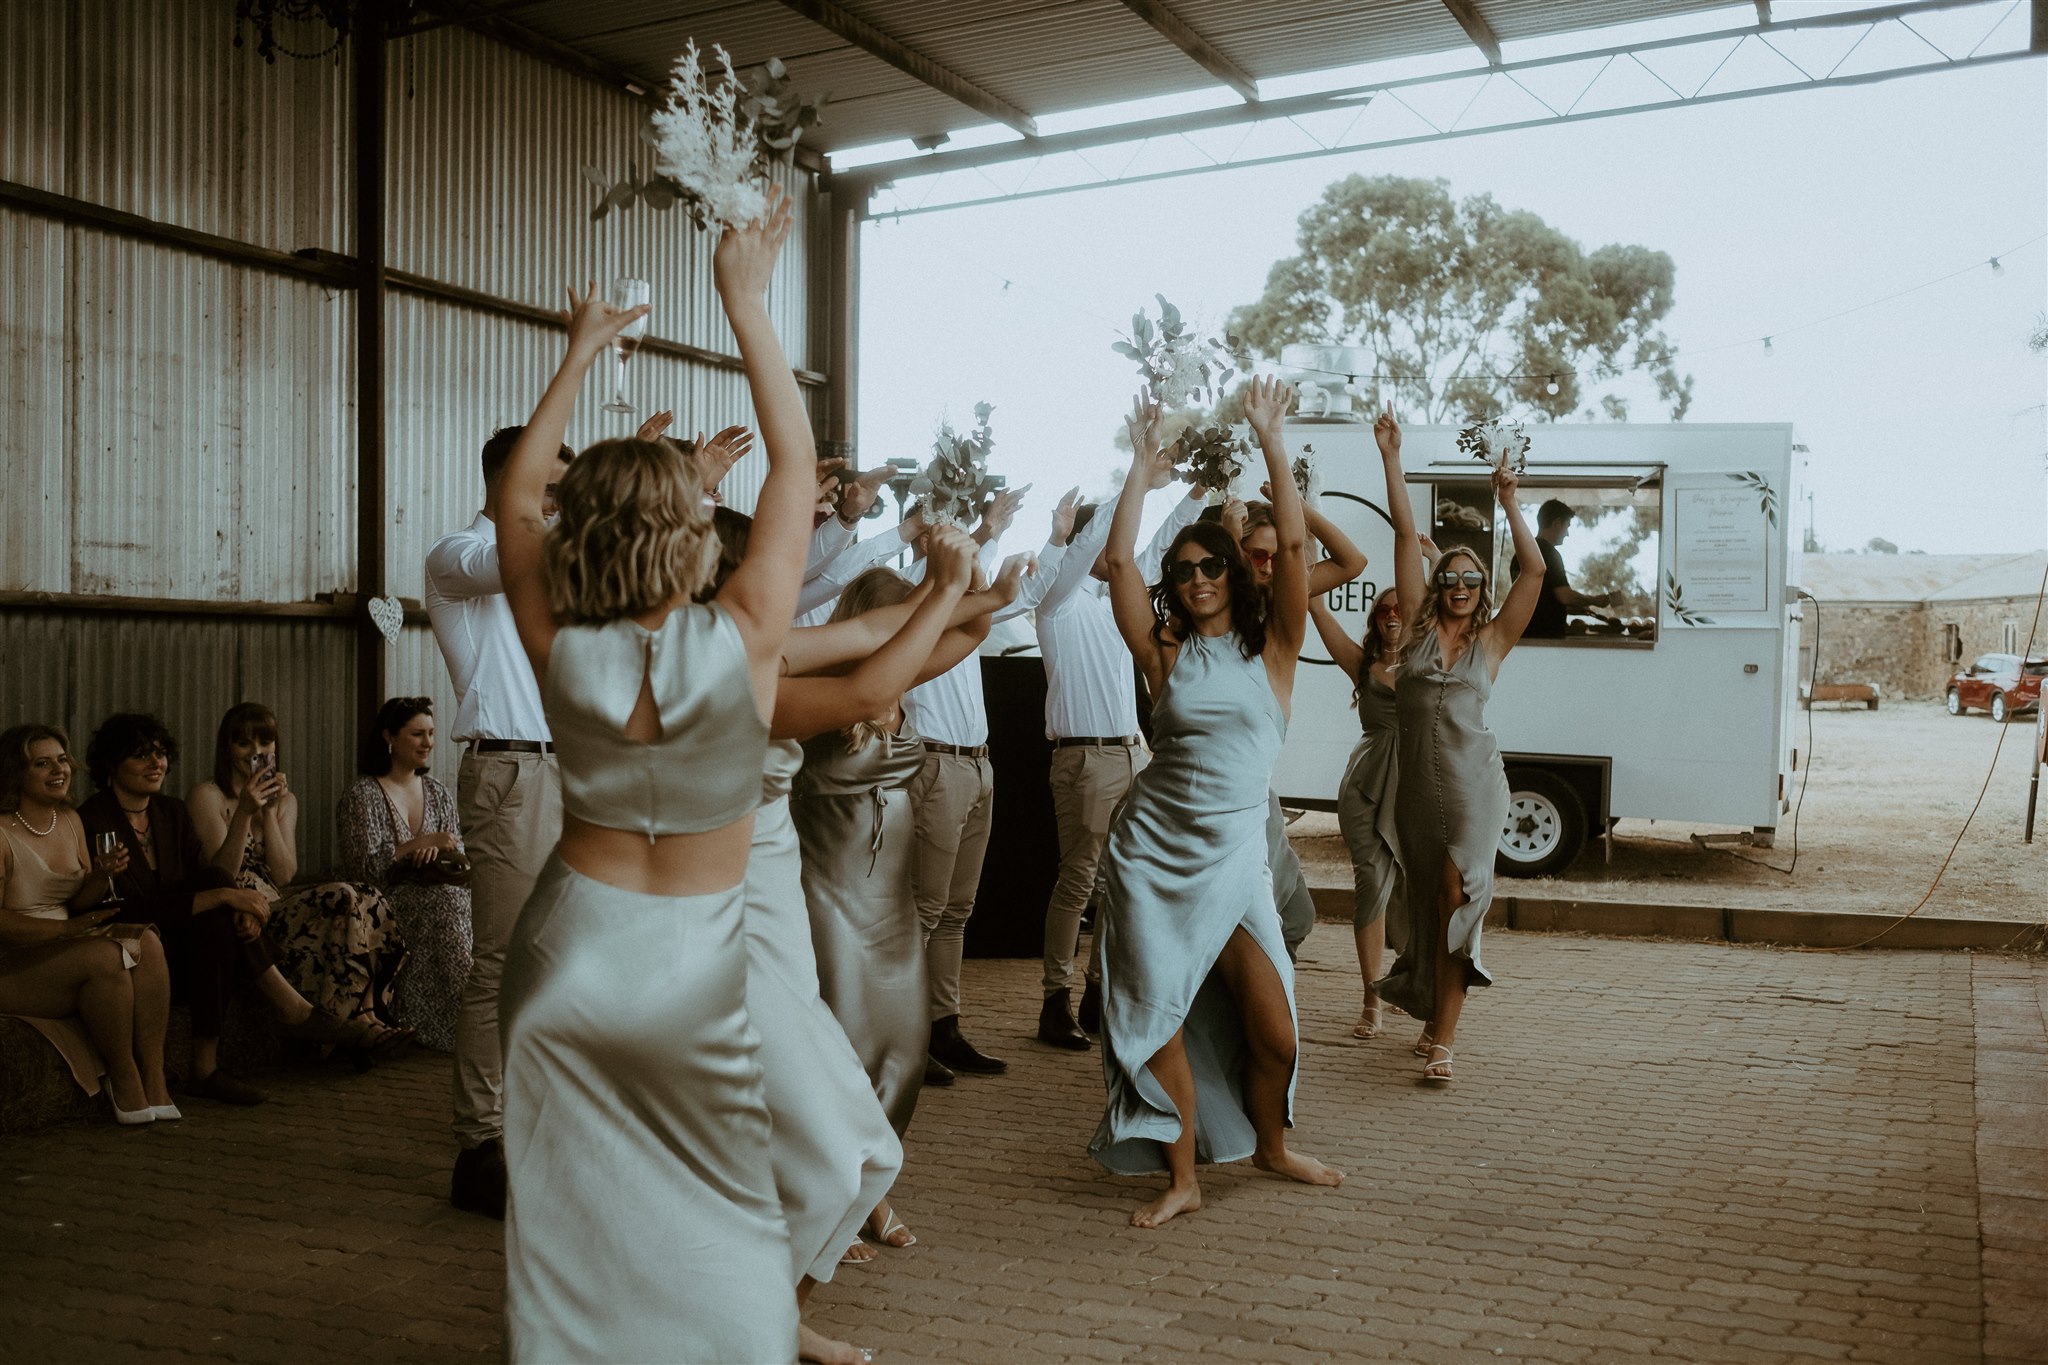 Bremer Farm is a charming dry hire wedding venue nestled between farmland and vineyards in the Fleurieu Peninsula, with outdoor spaces and rustic buildings, catering for up to 500 guests.